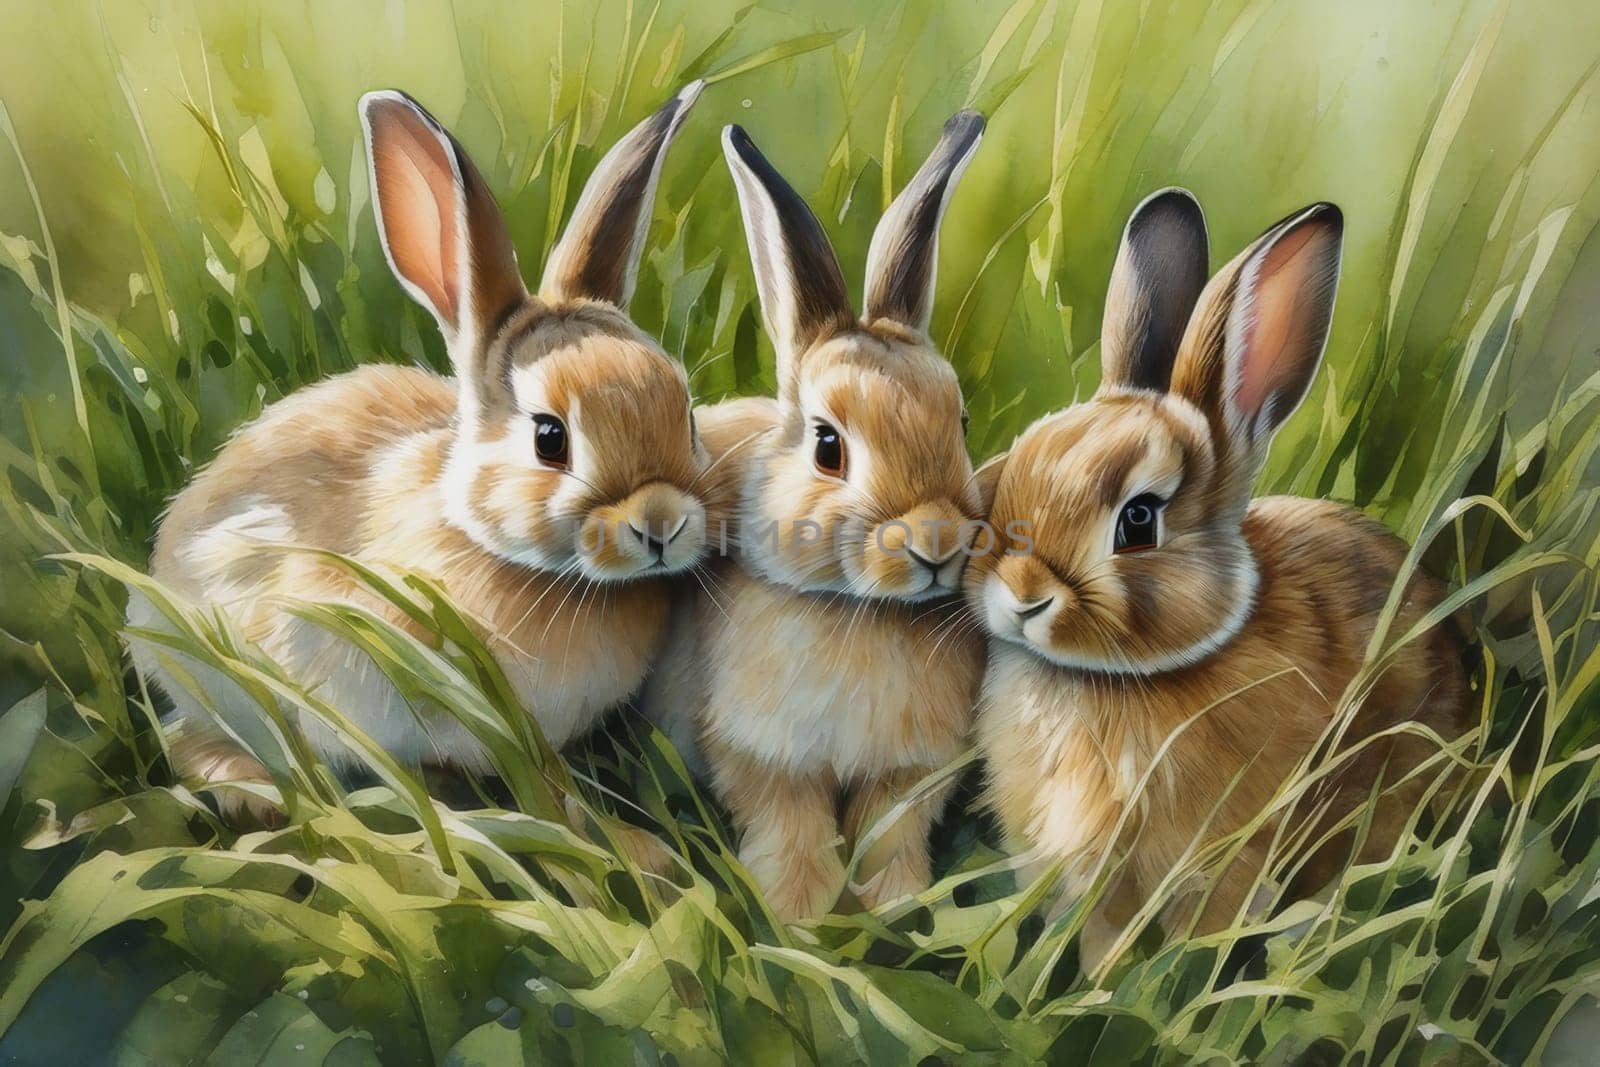 Rabbits. A family of rabbits on a green meadow. Spring flowers and green grass